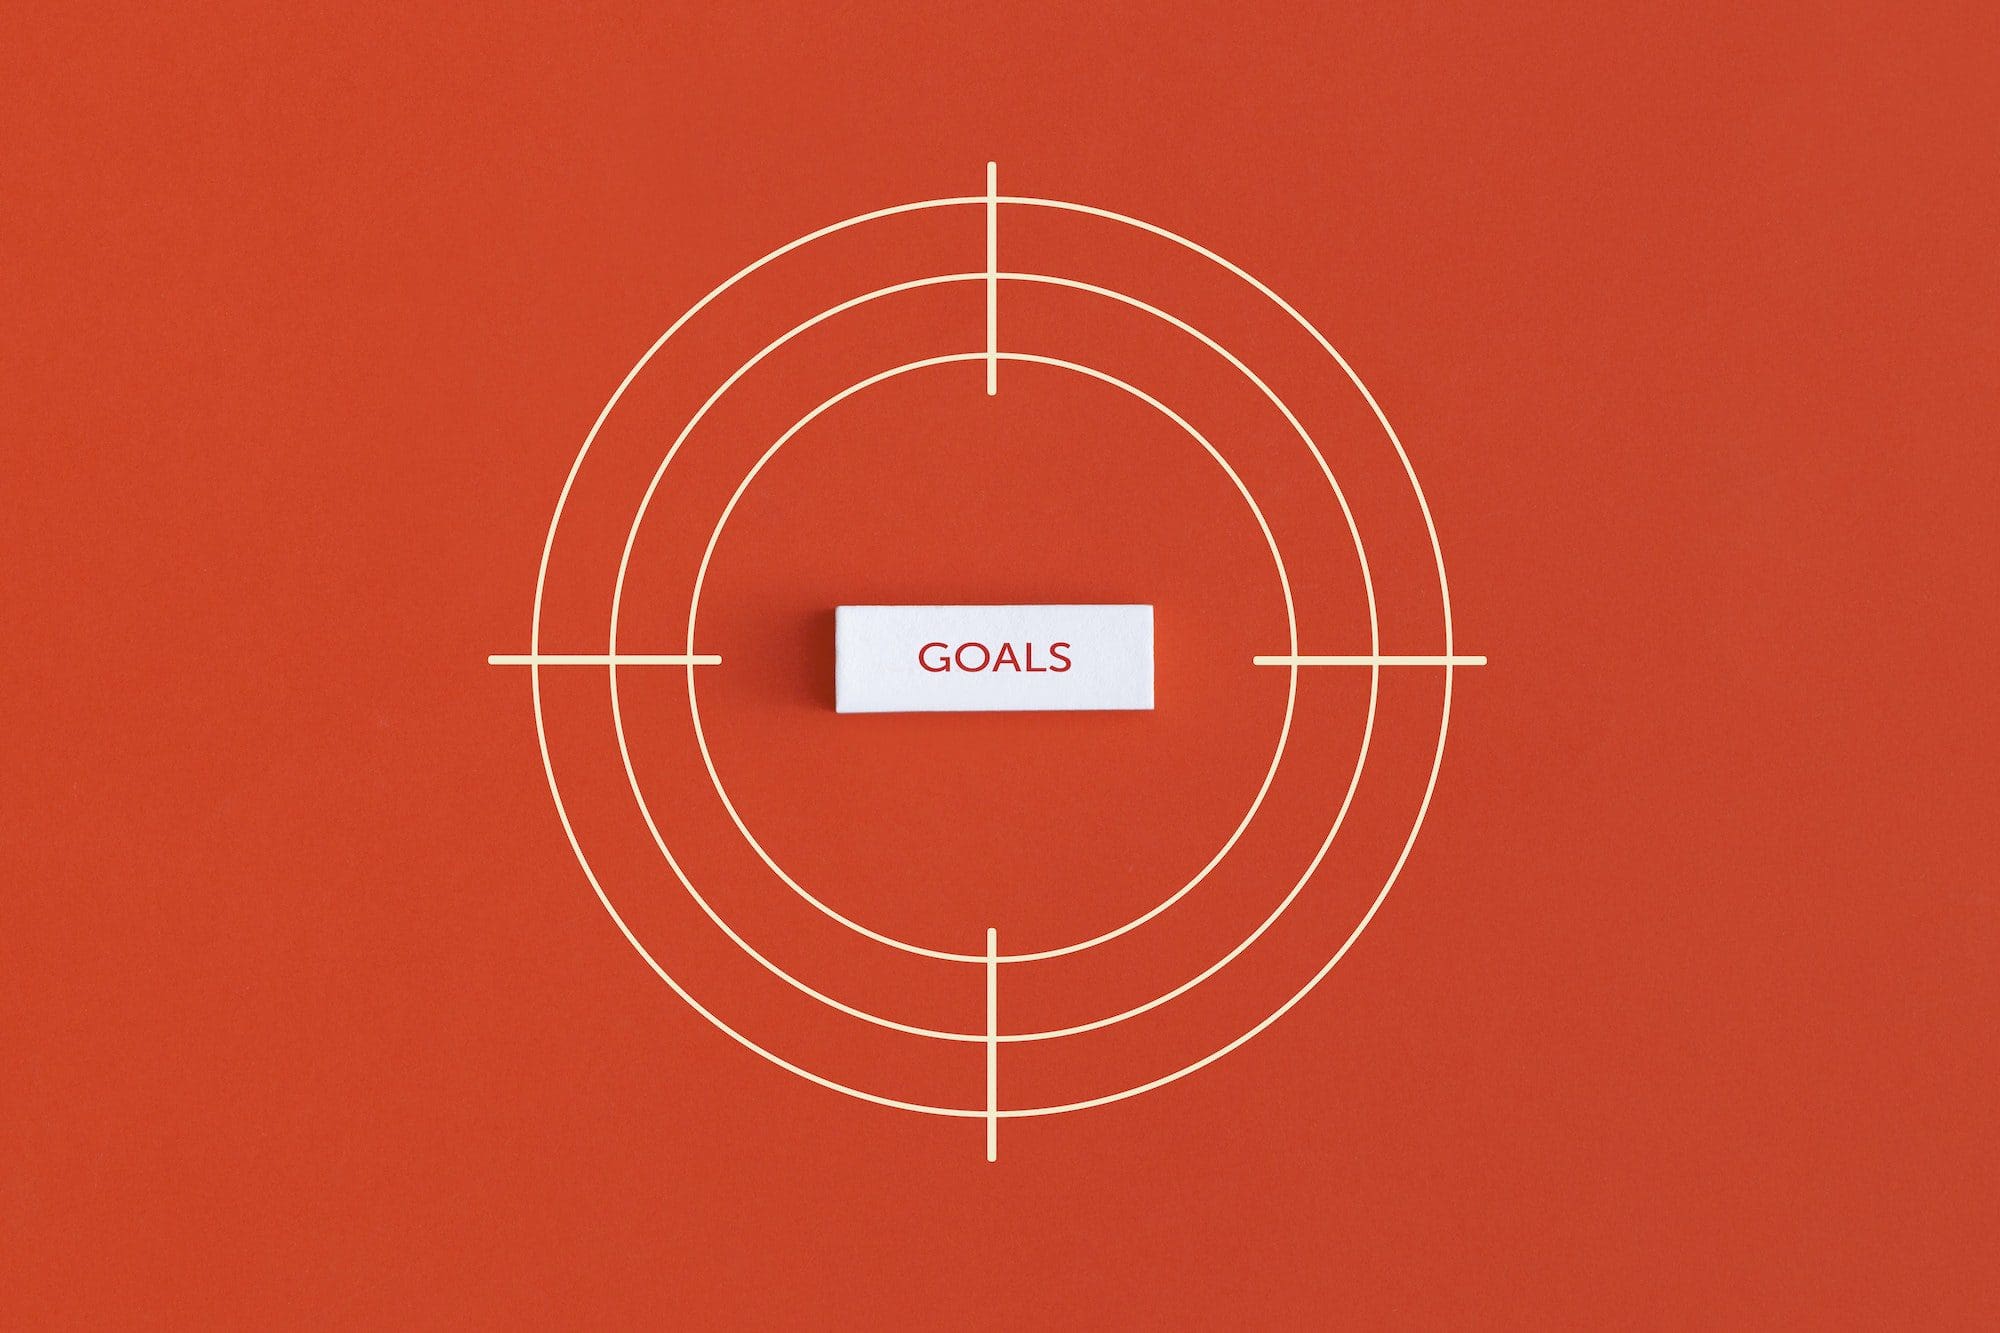 Goal word in the center of the target on red background.